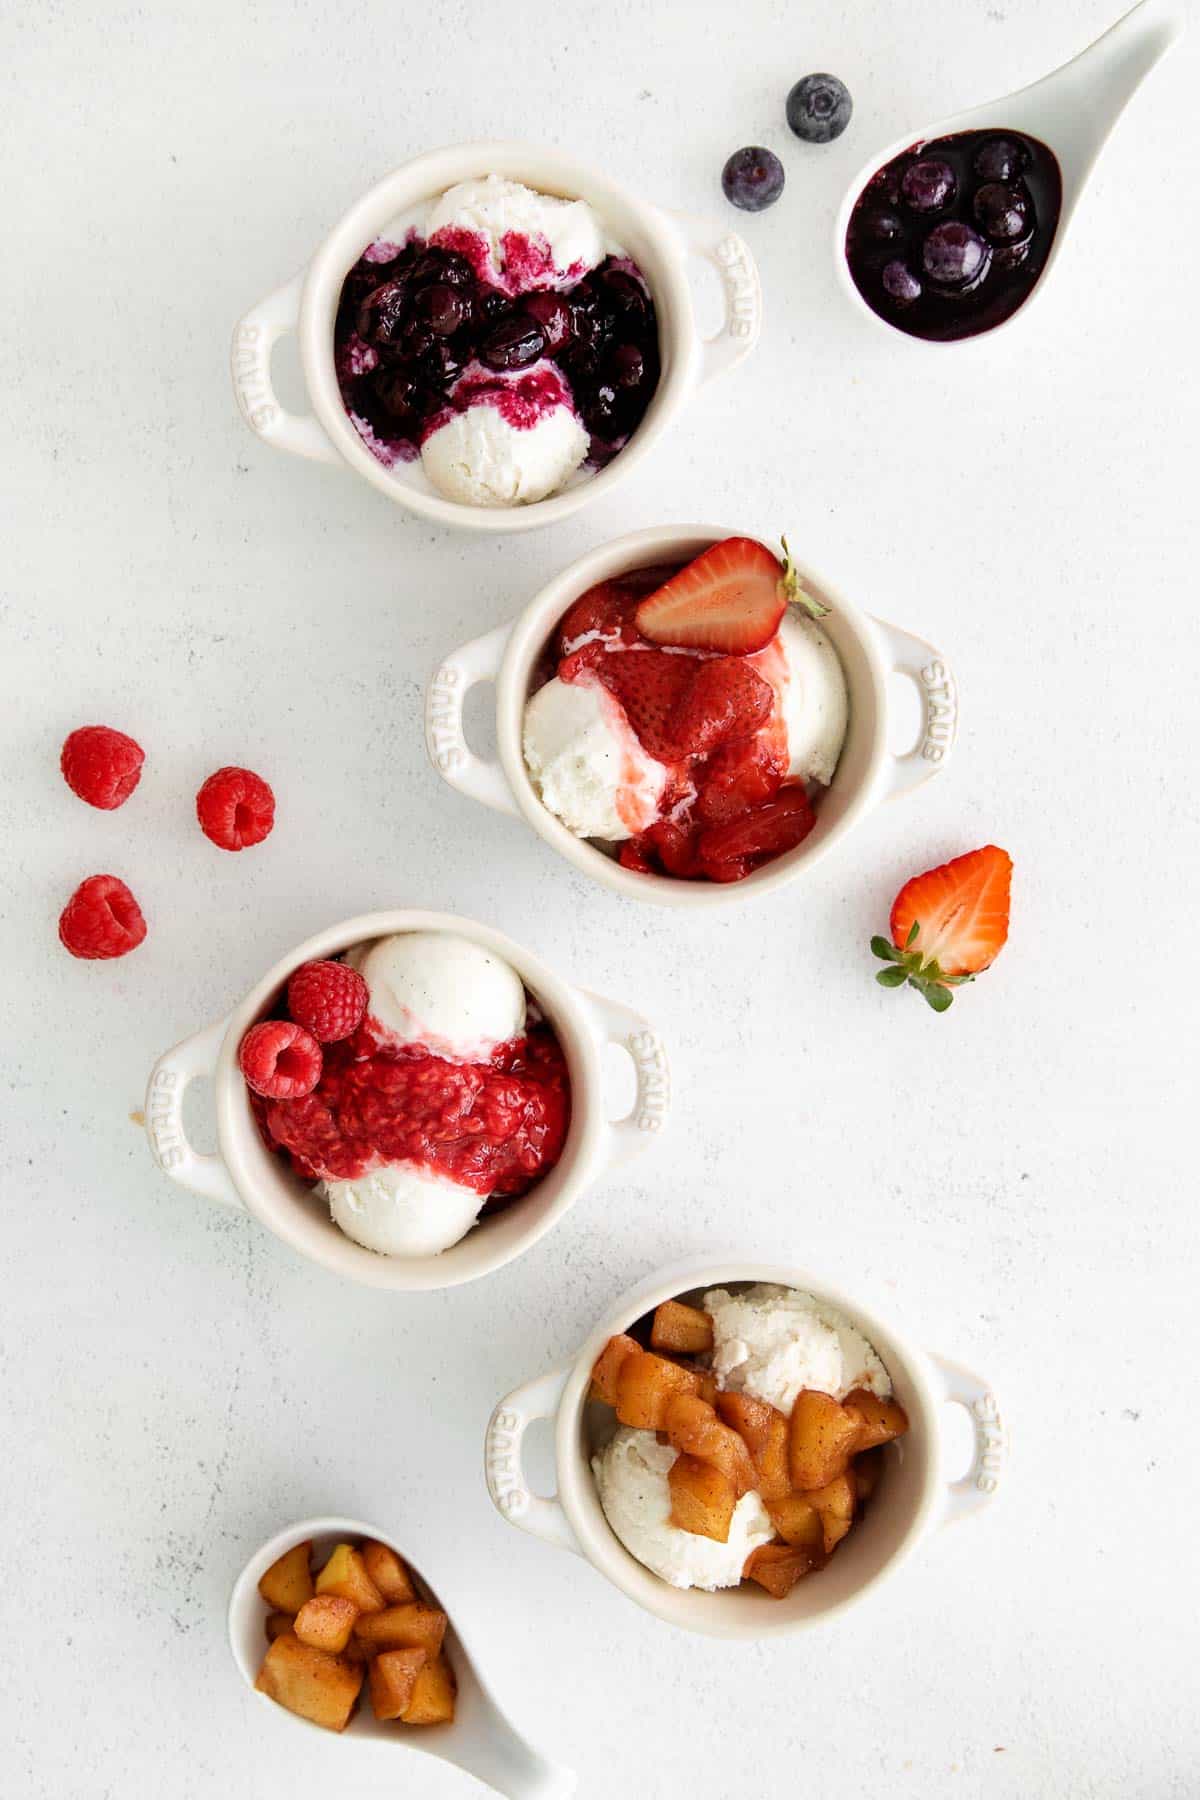 Four ramekins filled with vanilla ice cream and topped with different types of fruit compote